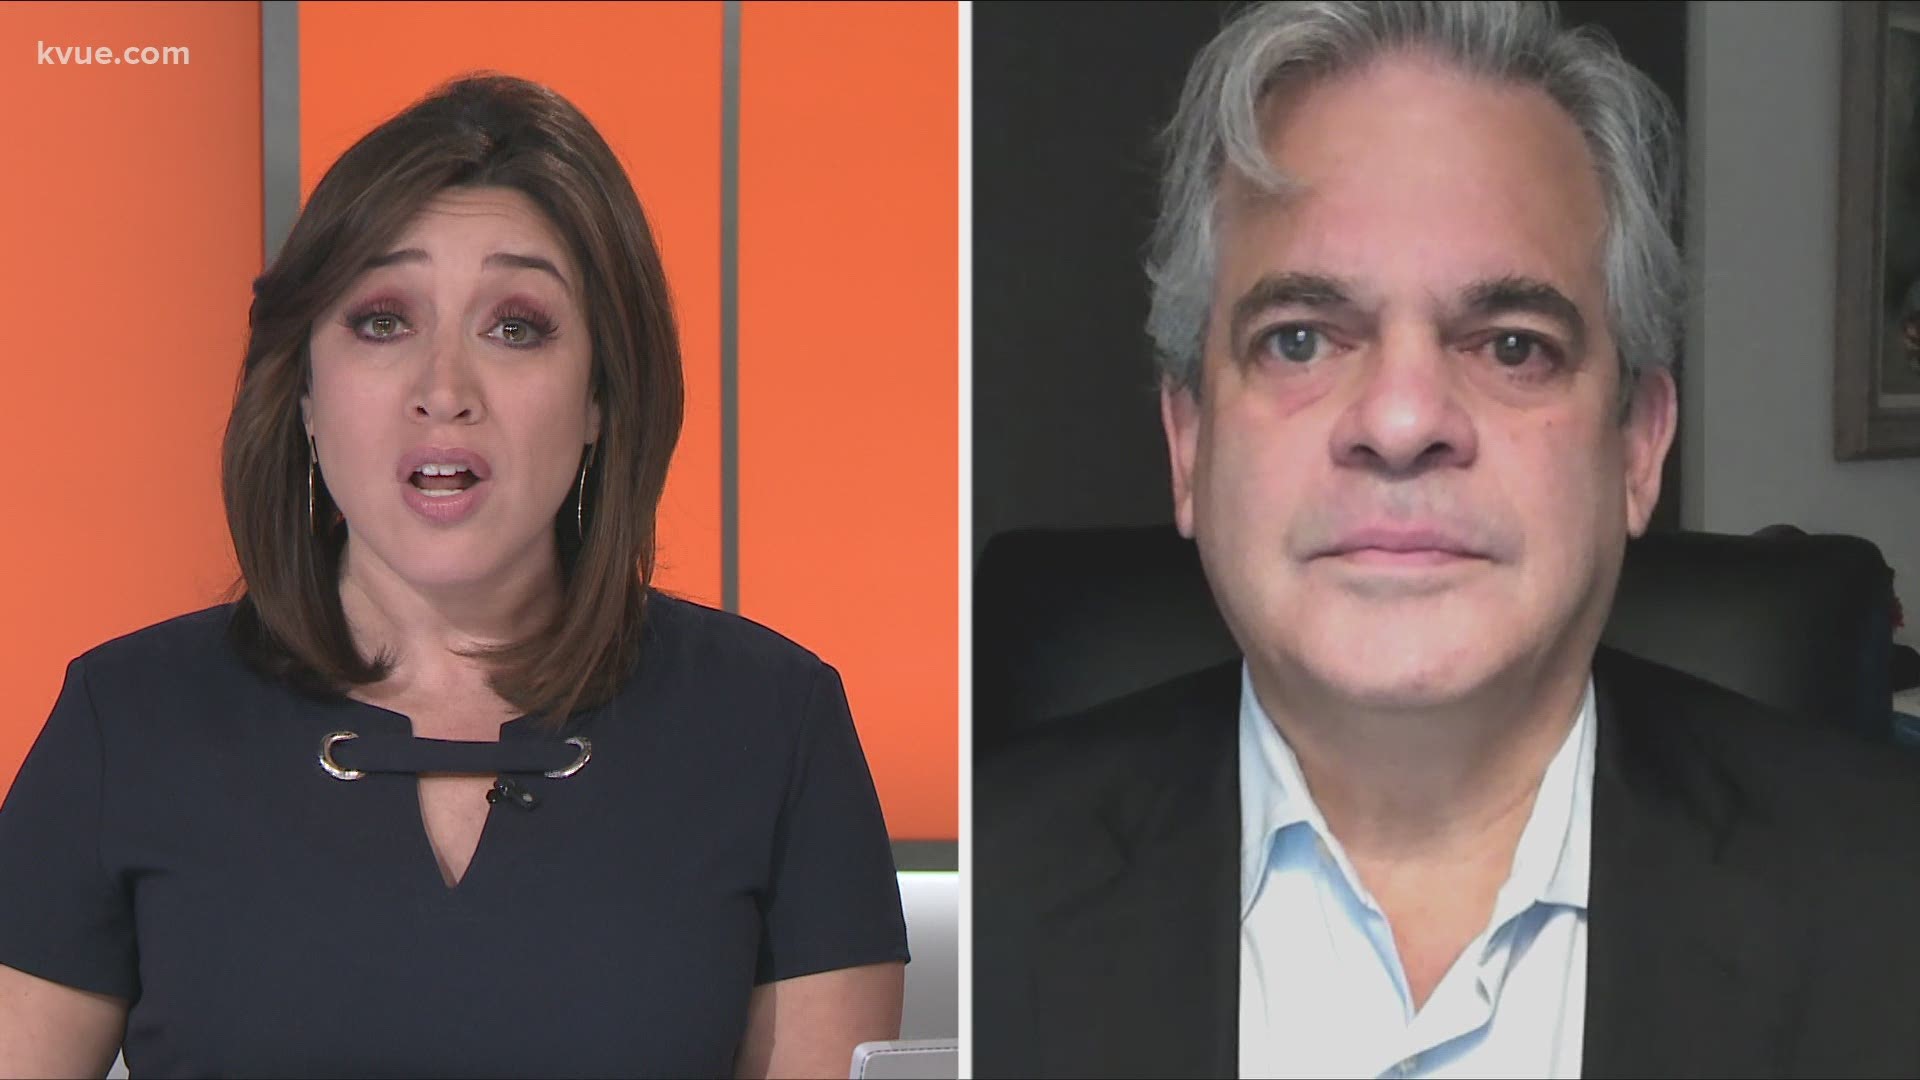 Austin Mayor Steve Adler joins us to discuss COVID-19 and vaccines as Austin remains in Stage 5, as well as homelessness.